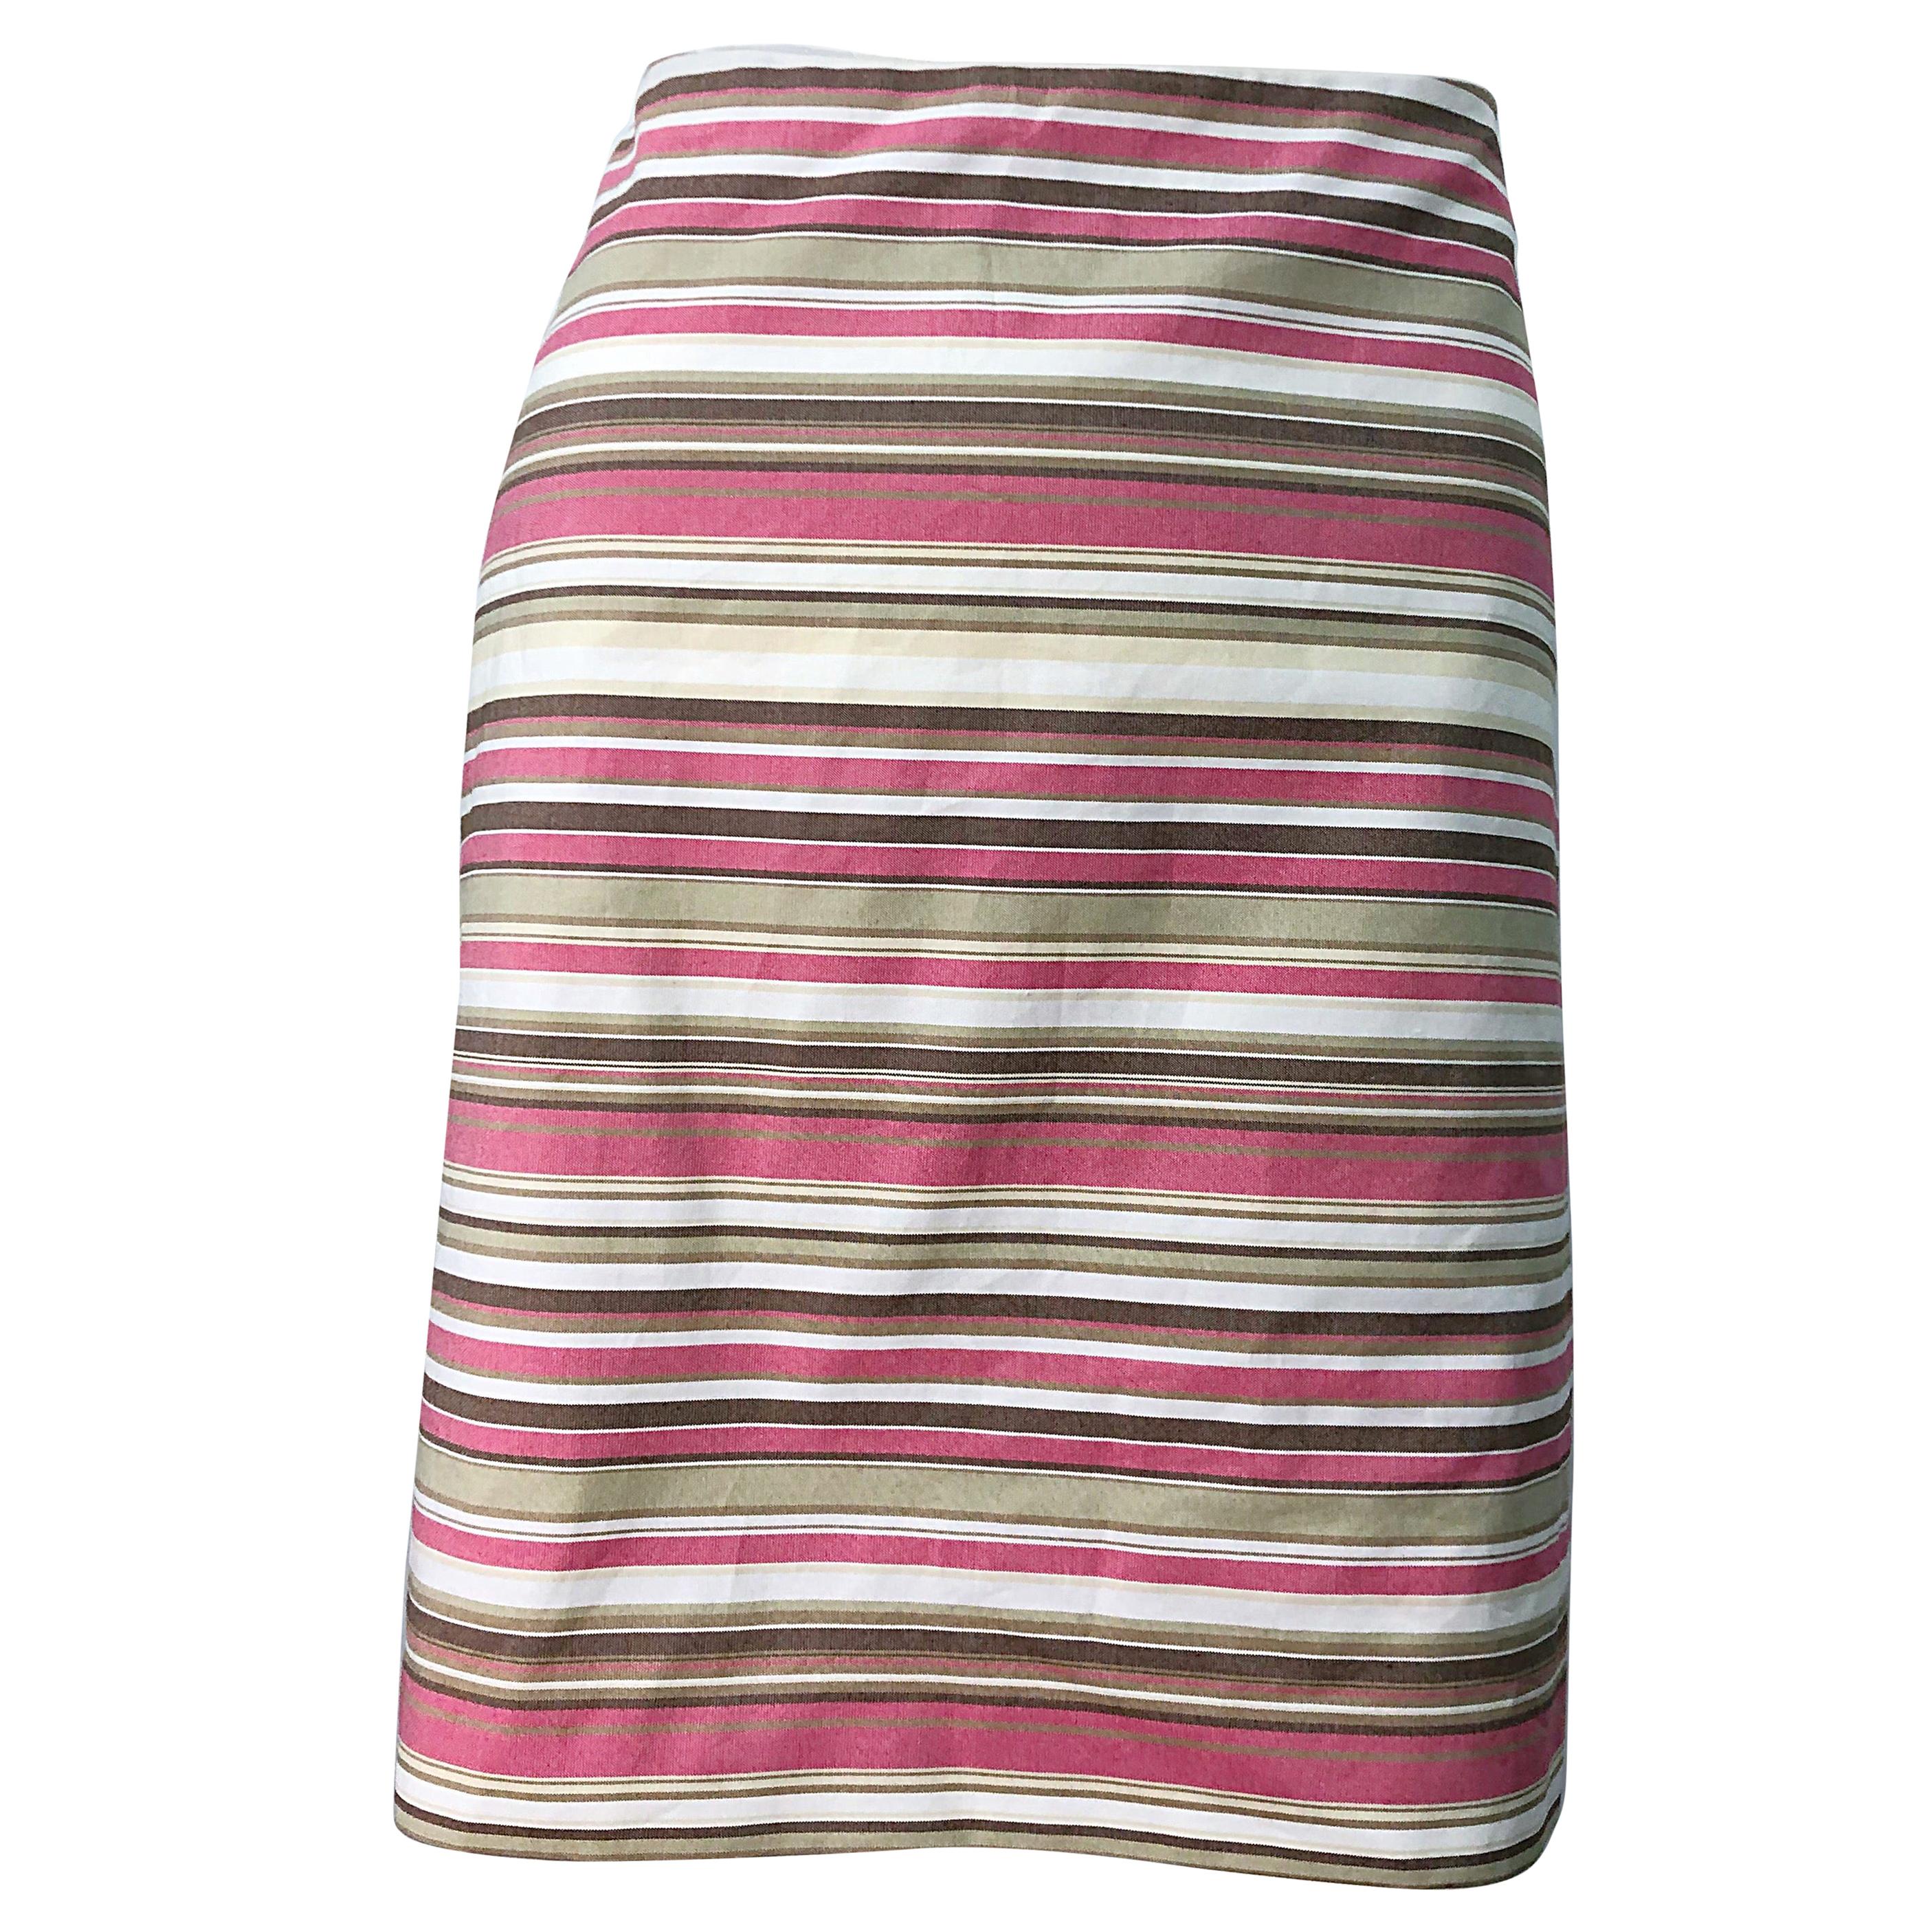 Michael Kors Collection Size 12 Pink + Brown + Tan 2000s Cotton Striped Skirt